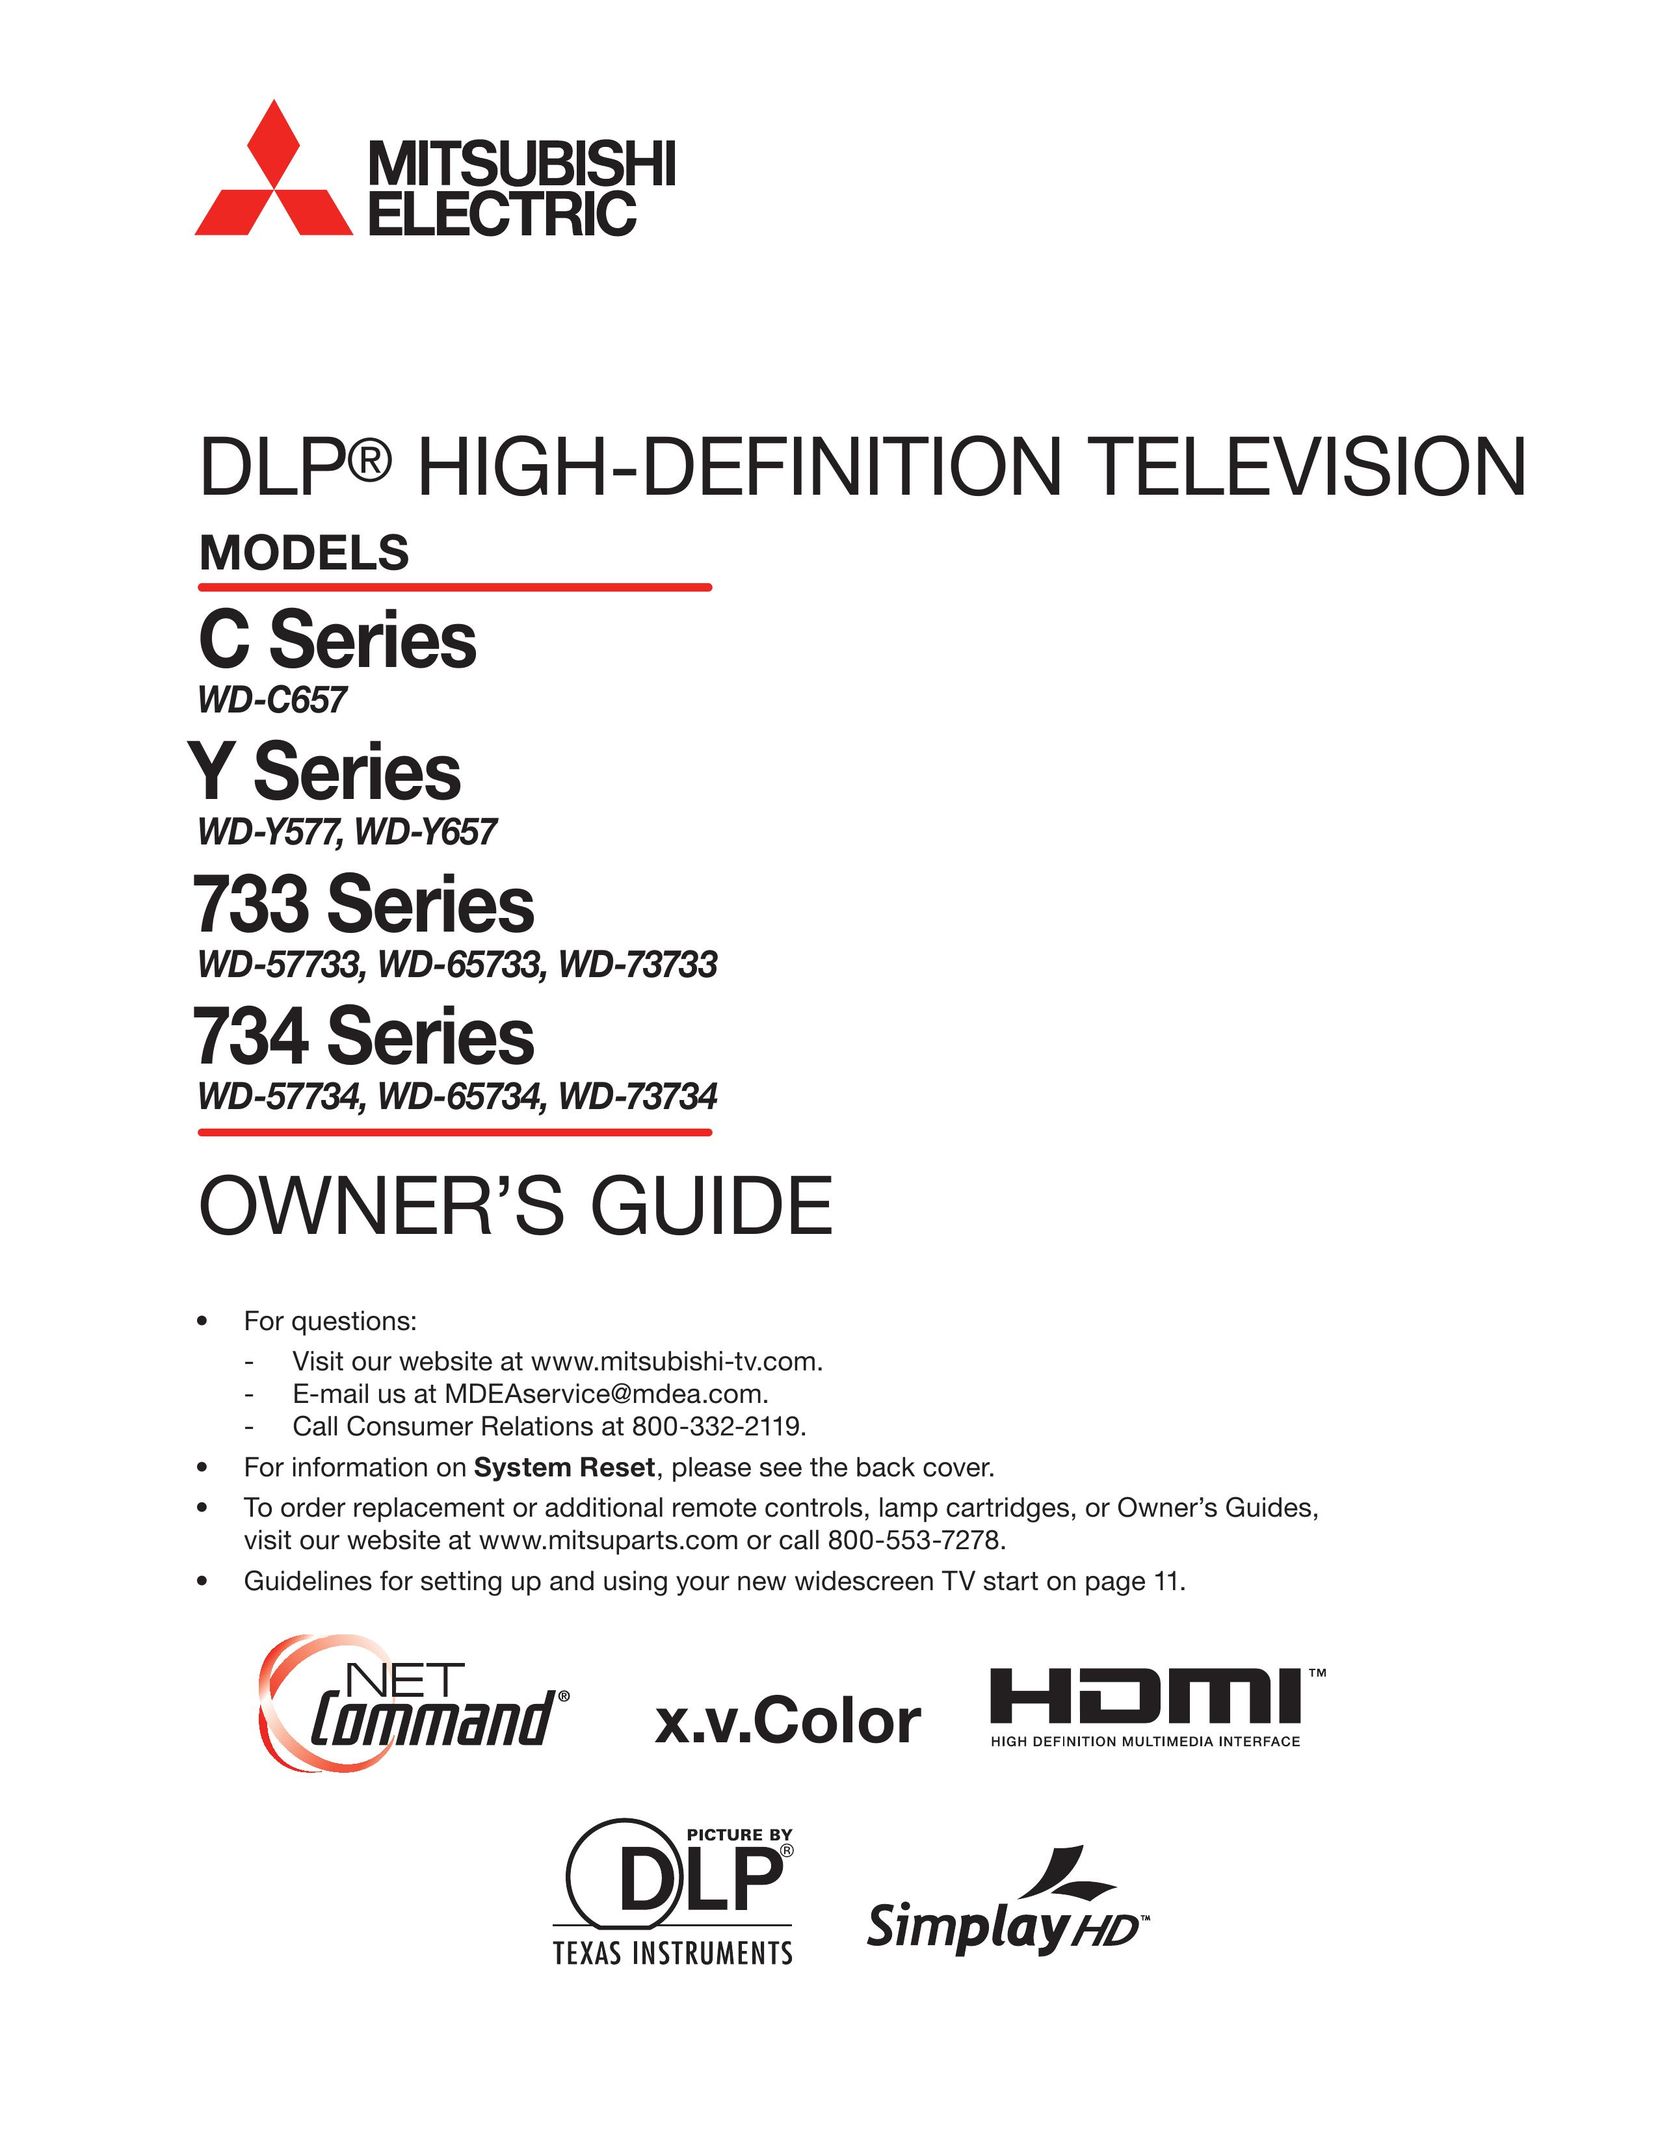 Mitsumi electronic WD-Y577 Flat Panel Television User Manual